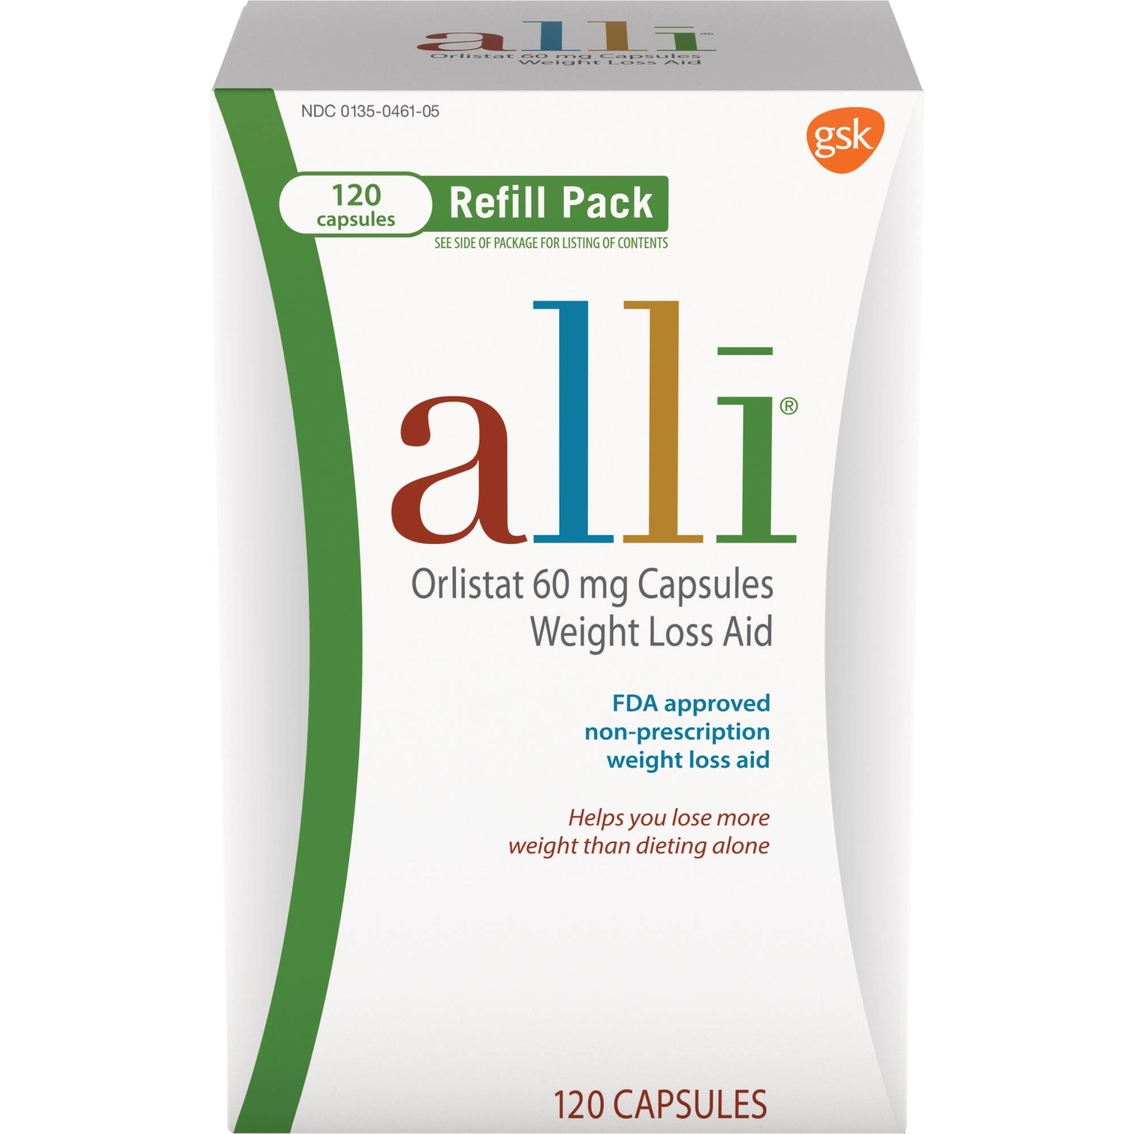 alli Weight Loss Aid Refill 120 Ct. - Image 1 of 3